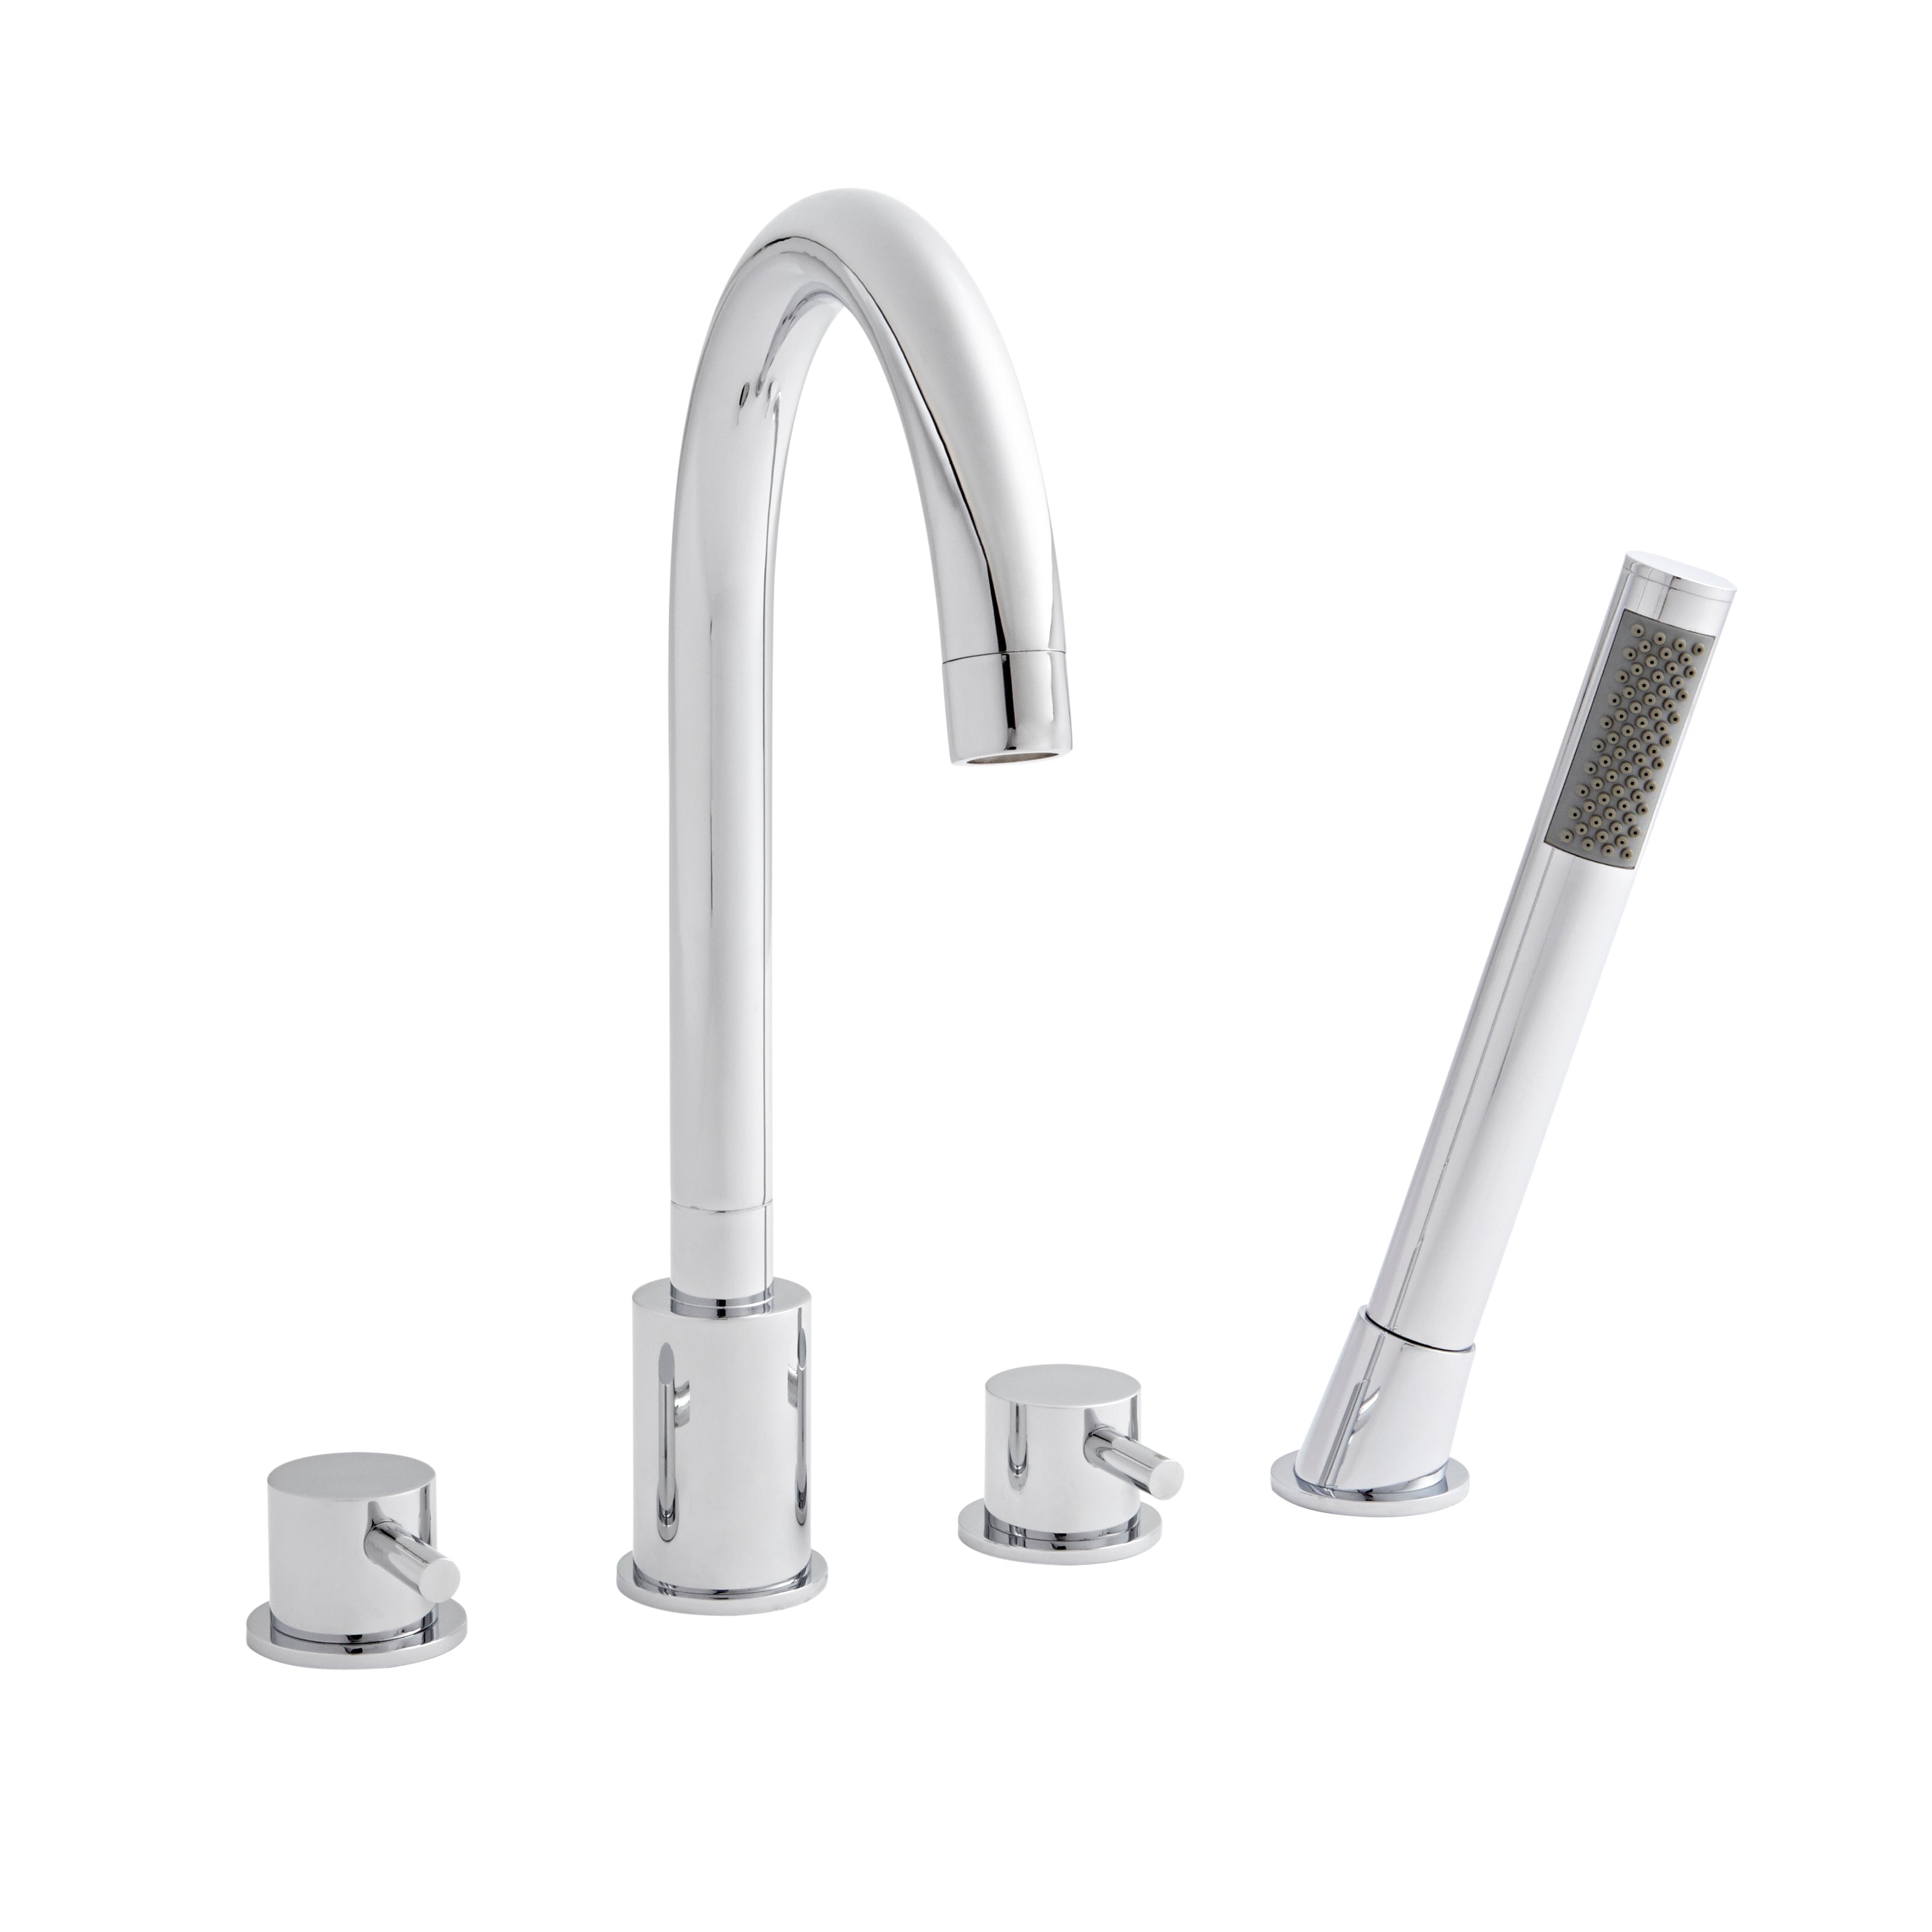 Upgrade Your Bath Experience with Thermostatic Bath Shower Mixer Taps